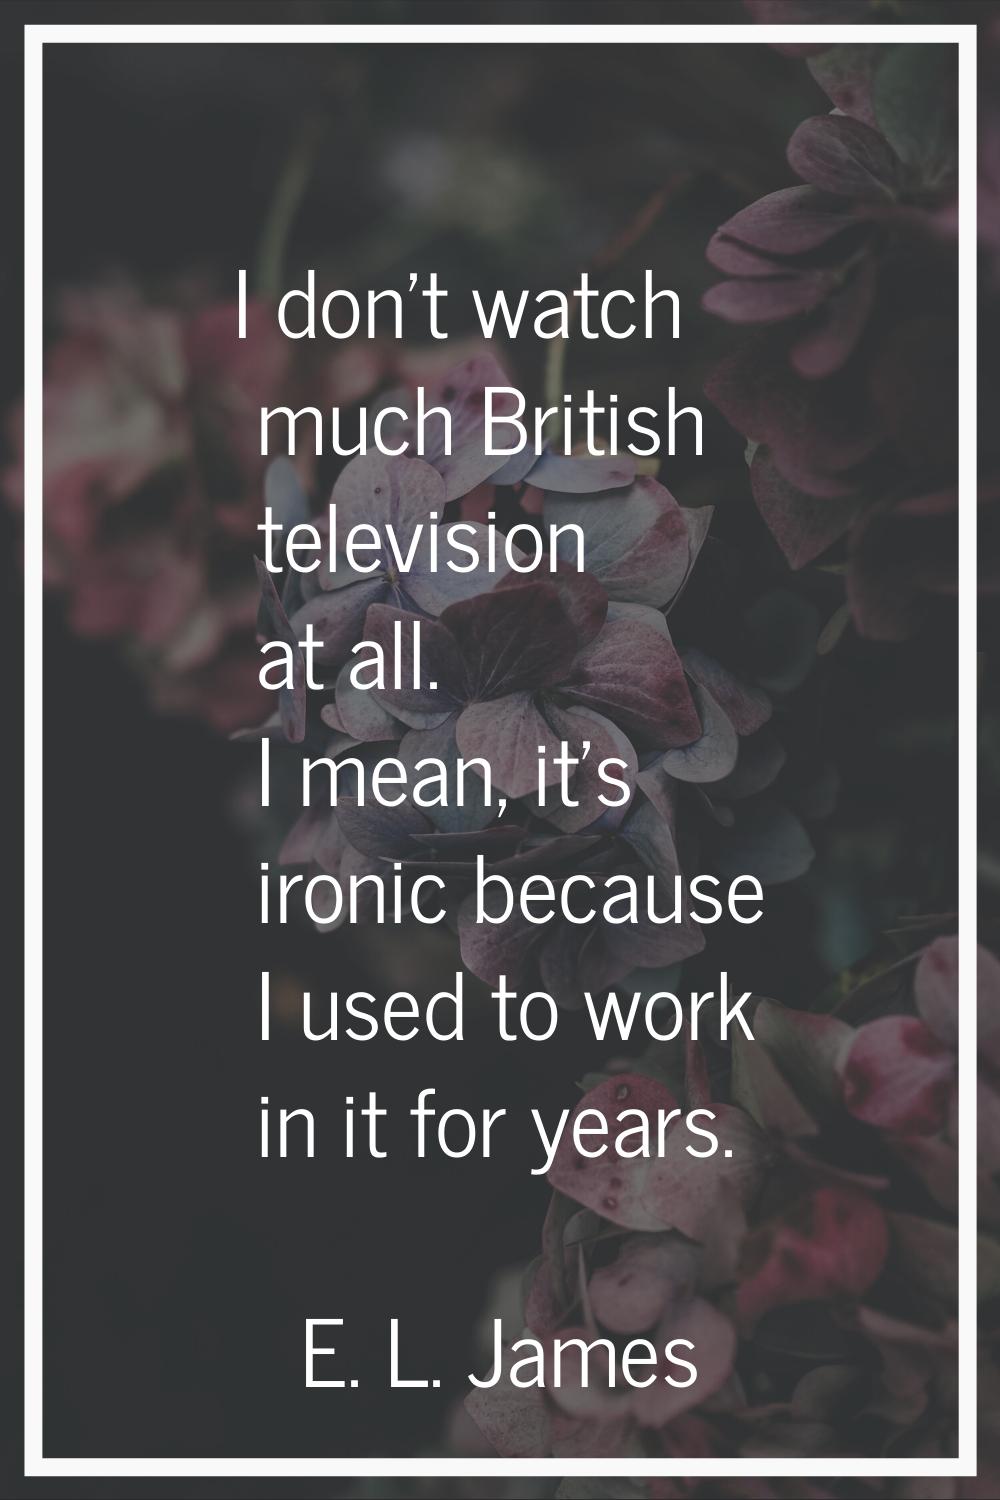 I don't watch much British television at all. I mean, it's ironic because I used to work in it for 